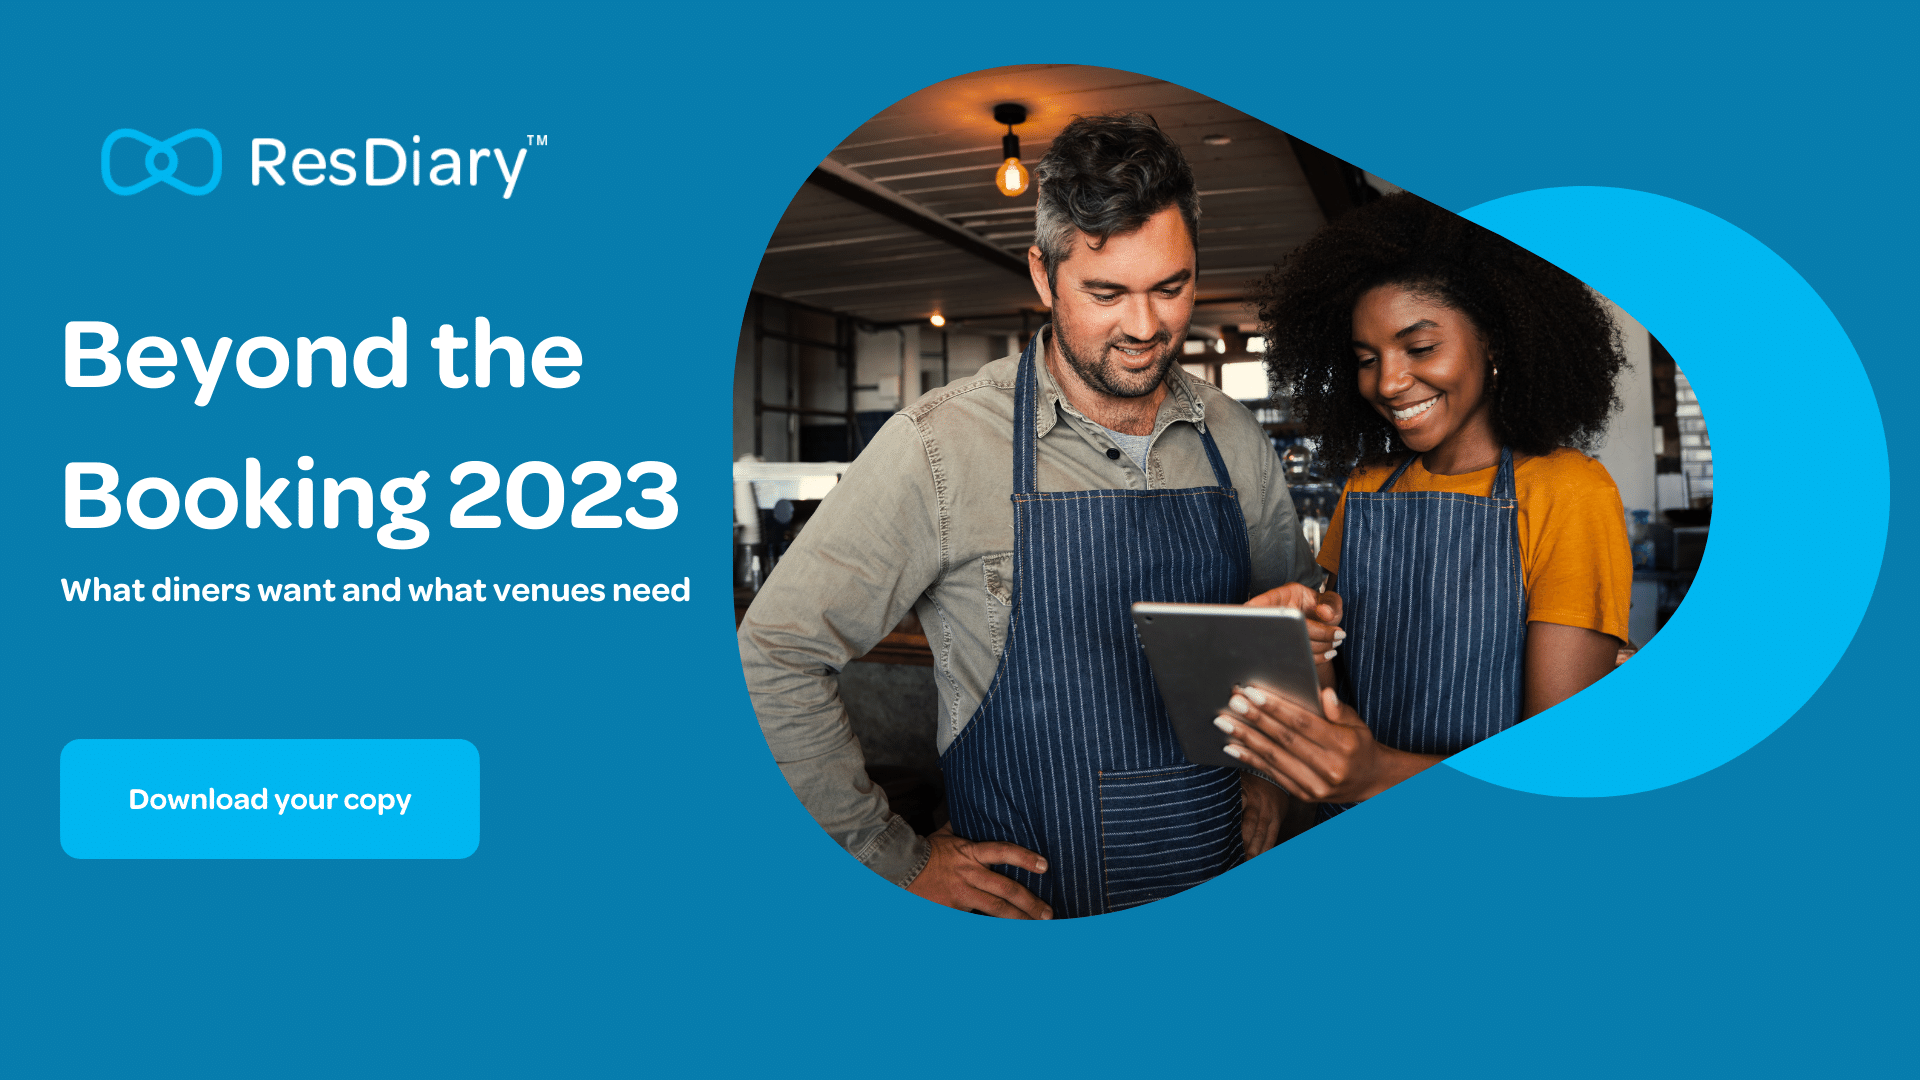 Call to action - Download Beyond the Booking Hospitality Industry Report 2023 Q1